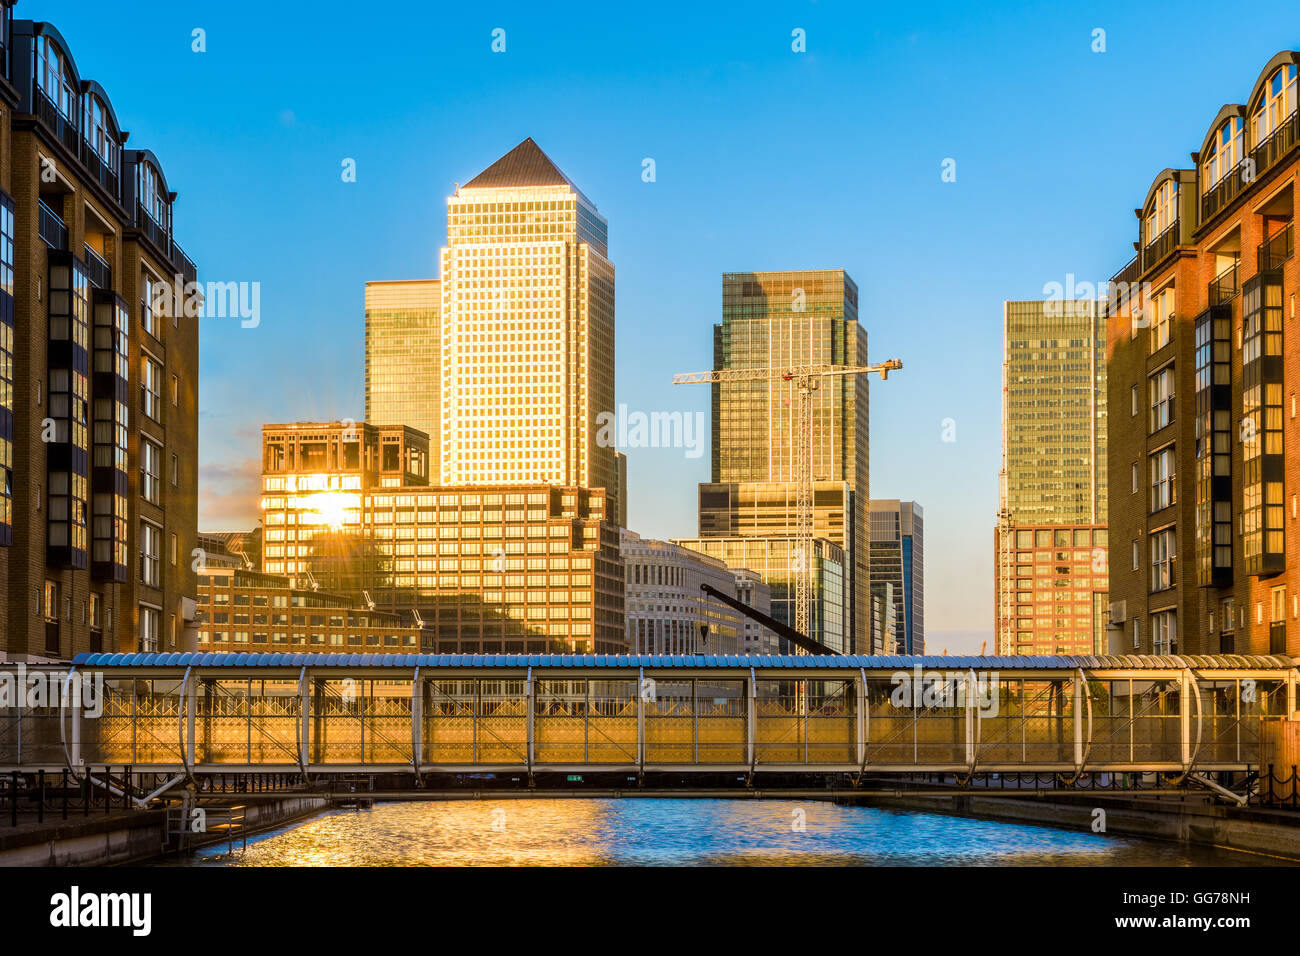 Canary Wharf, financial hub in London at sunset seen from Nelson Dock Pier Stock Photo